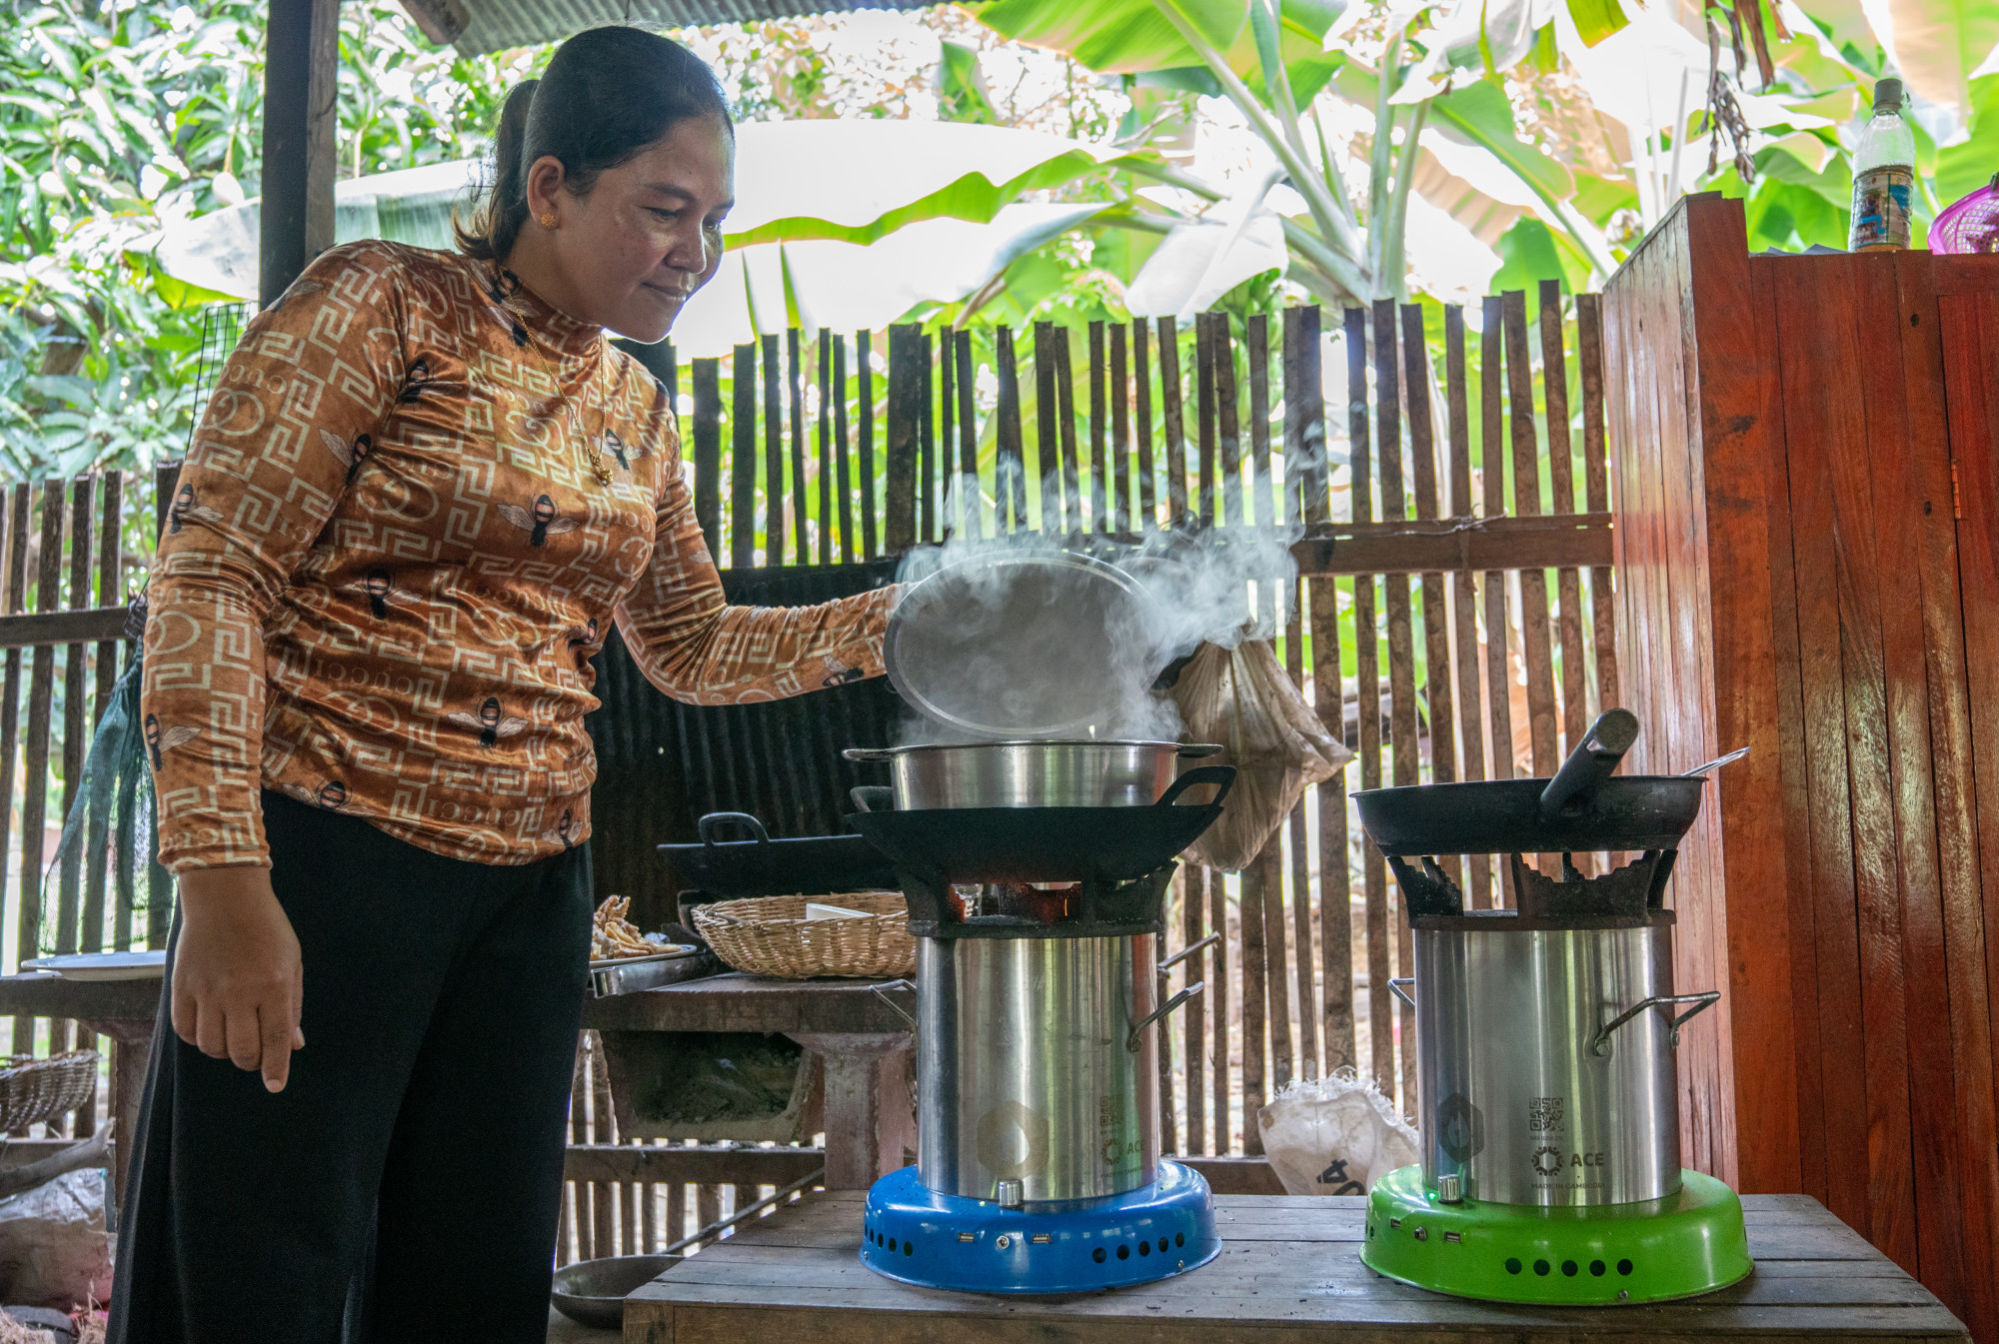 THACH USES HER CLEAN COOKSTOVE TO PREPARE DINNER FOR HER FAMILY.